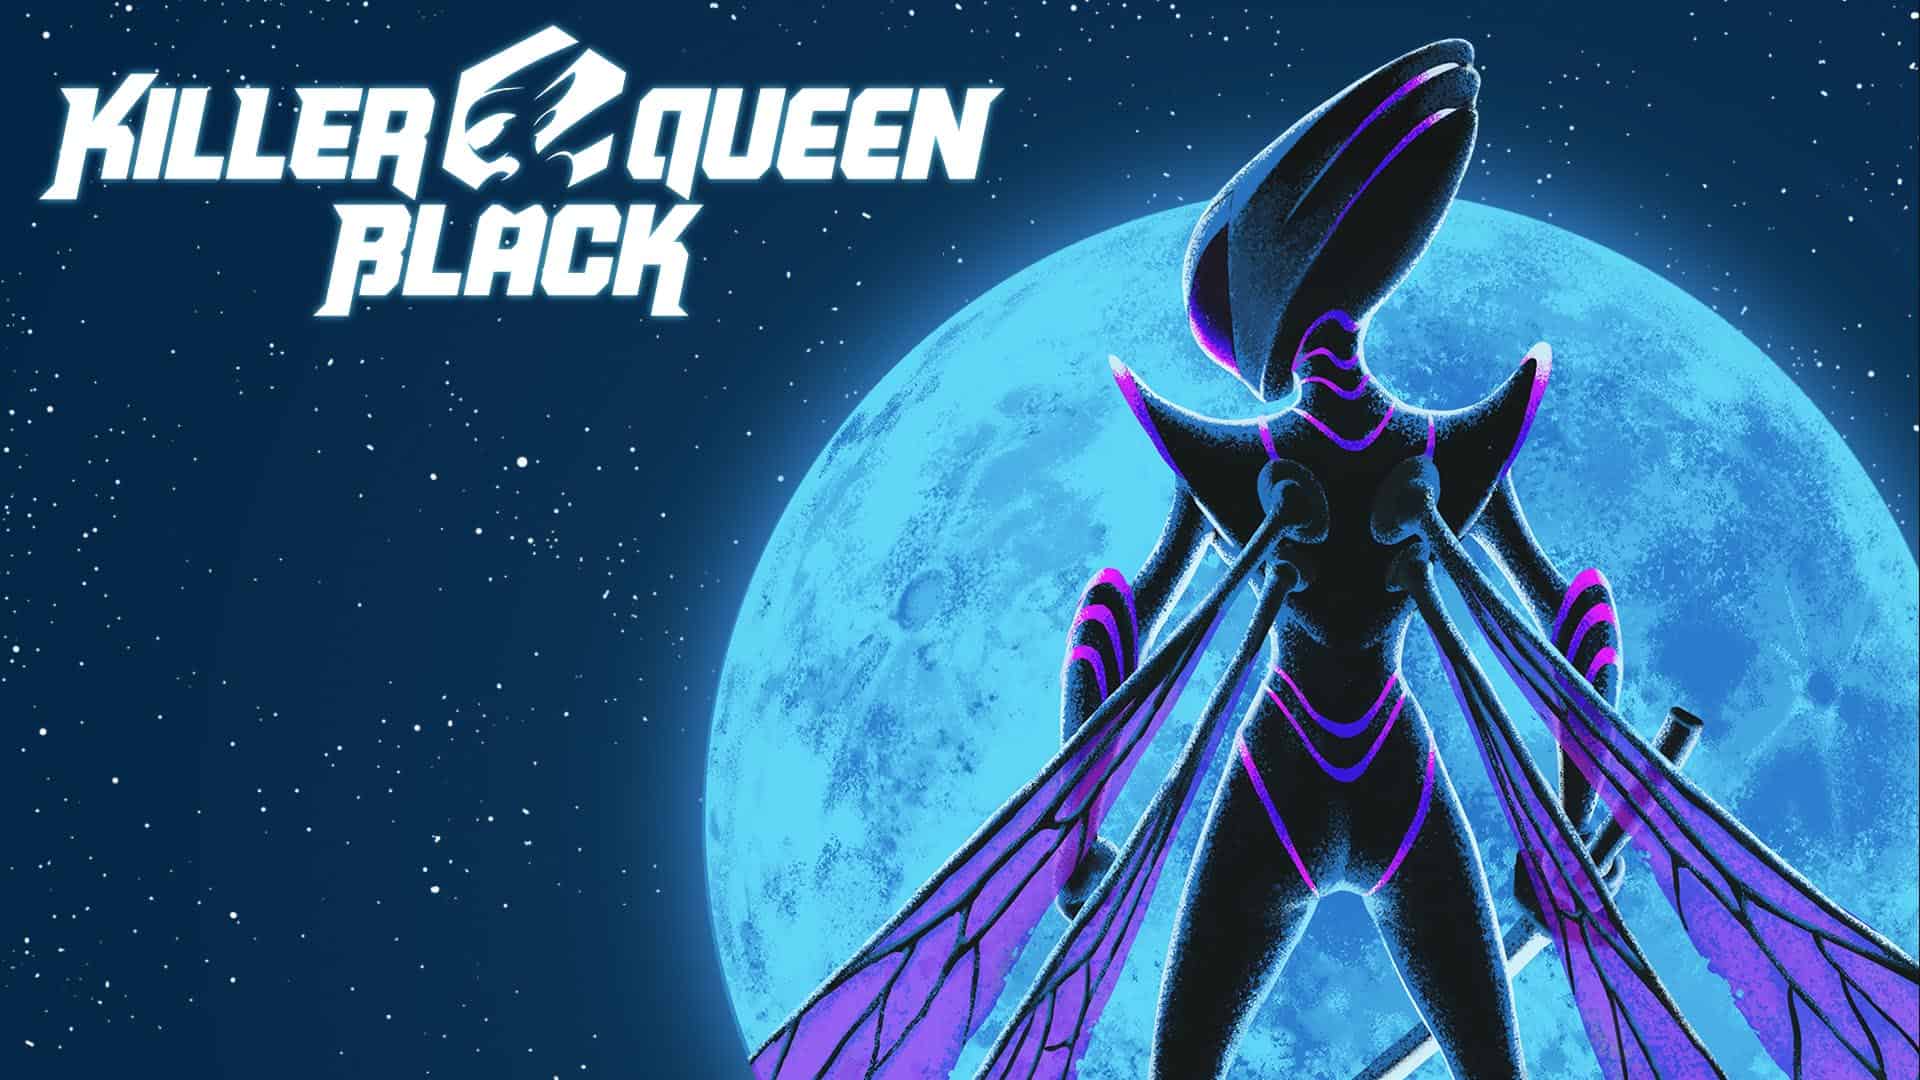 Killer Queen Black Coming To Xbox Game Pass February 23